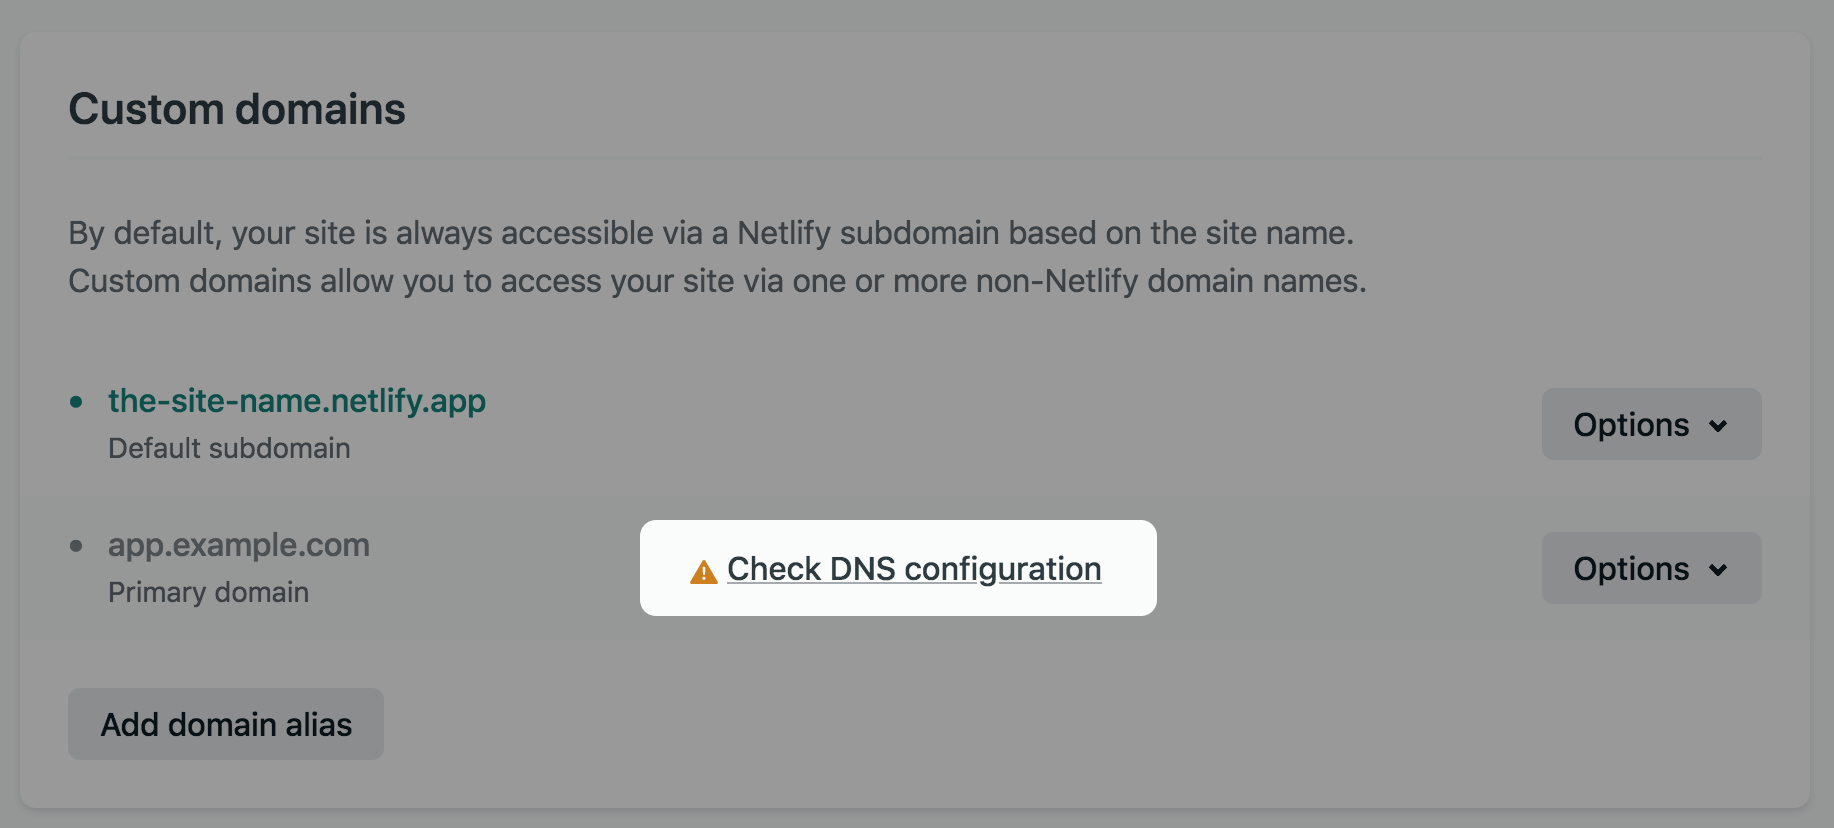 The link is between the domain name and the options menu.